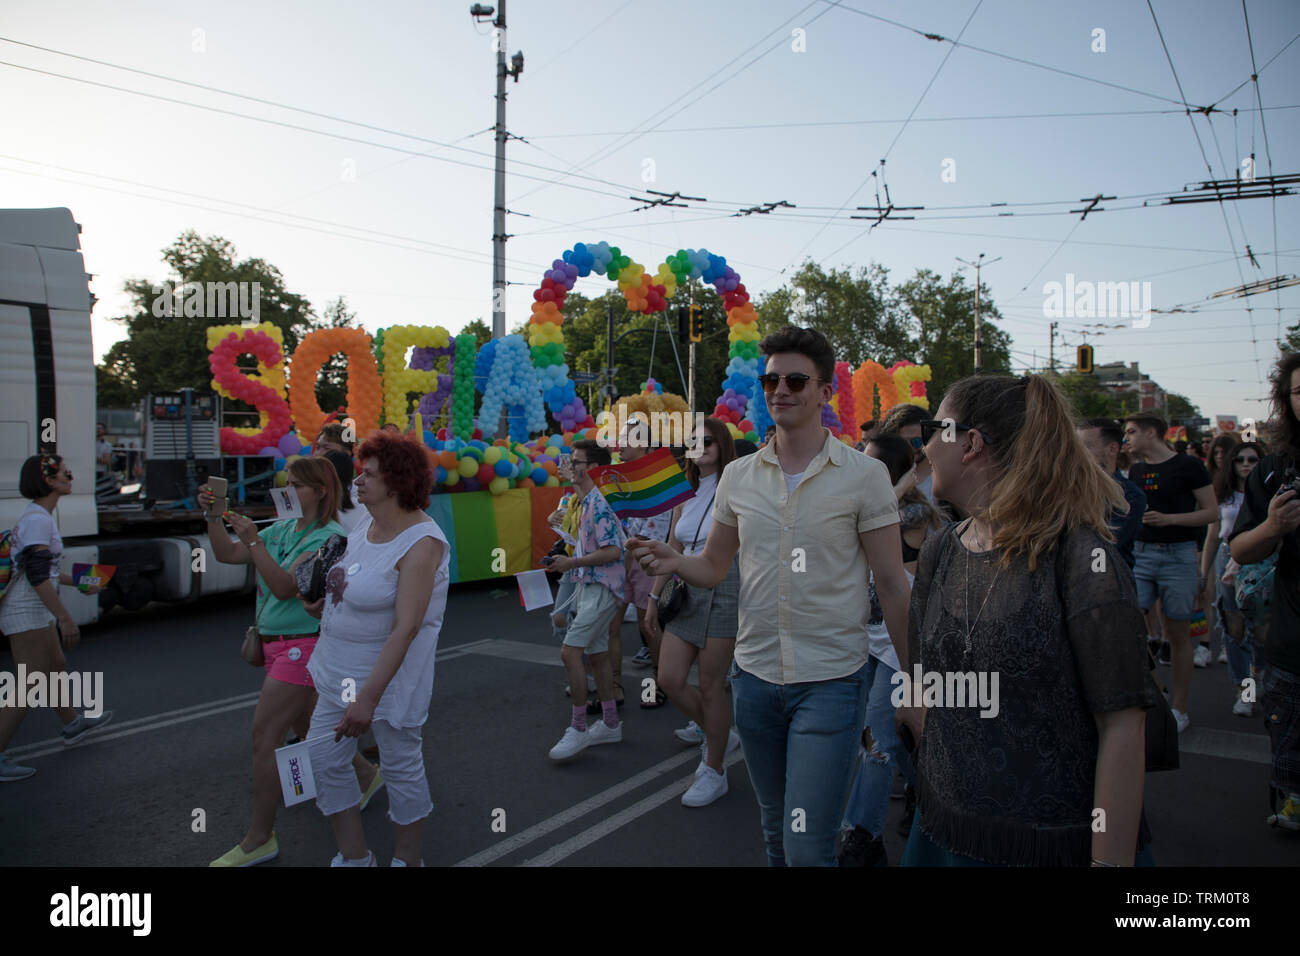 Sofia, Bulgaria - June 08, 2019: Sofia Pride is the biggest annual event dedicated to the equality and human rights of all citizens and the biggest Stock Photo